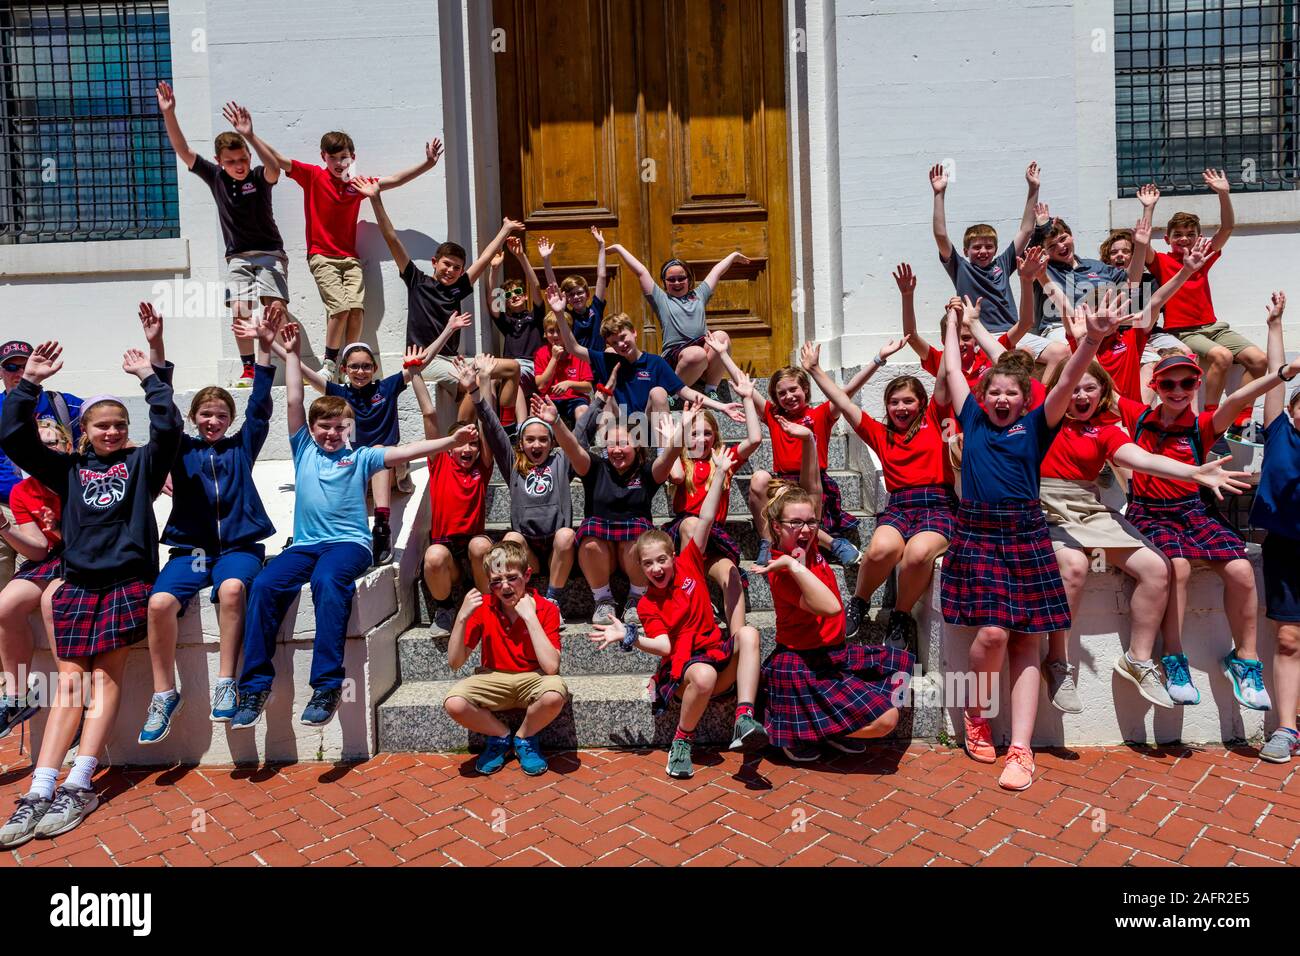 MAY 16, 2019 ST LOUIS, MO. USA - School kids raise hands and smile in front of Old Court House, St. Louis, MO Stock Photo